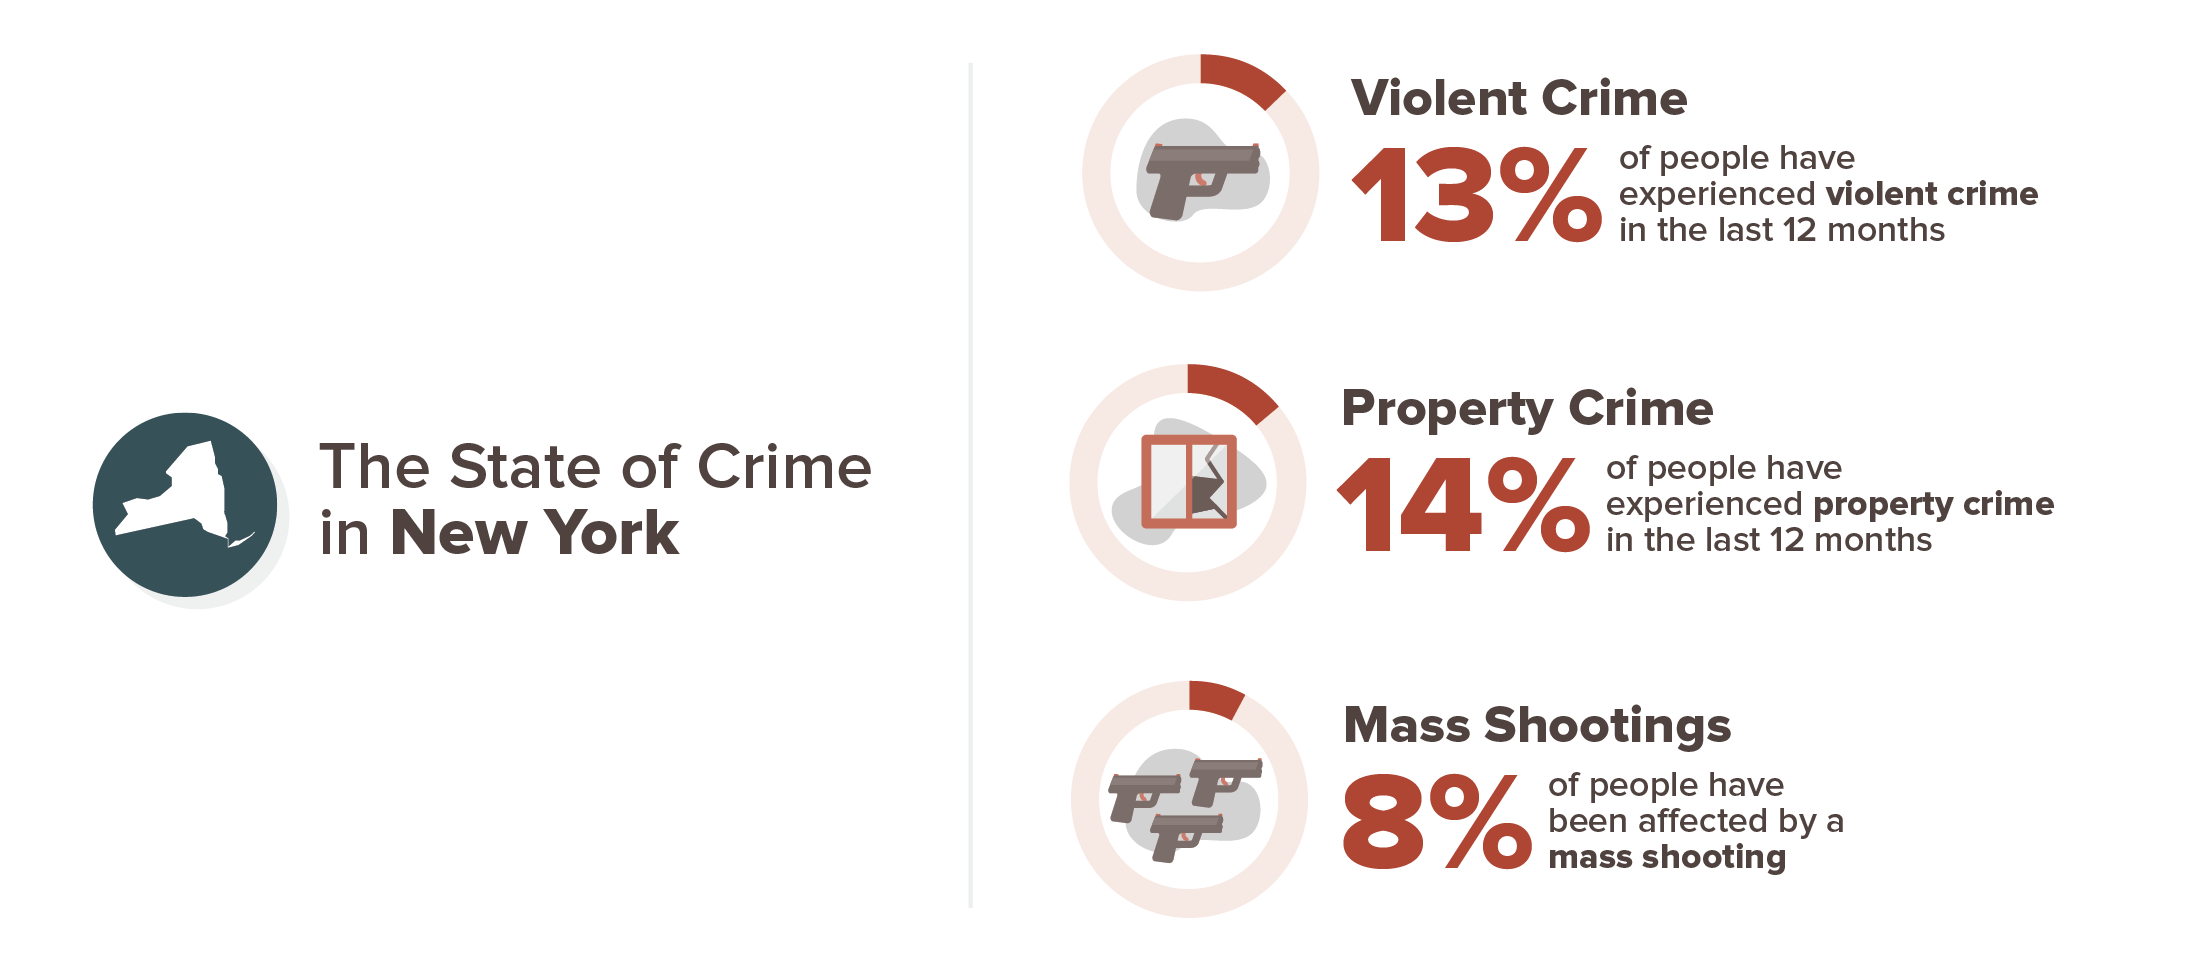 13 percent have experienced violent crime, 14 percent have experienced property crime, 8 percent have been affected by a mass shooting